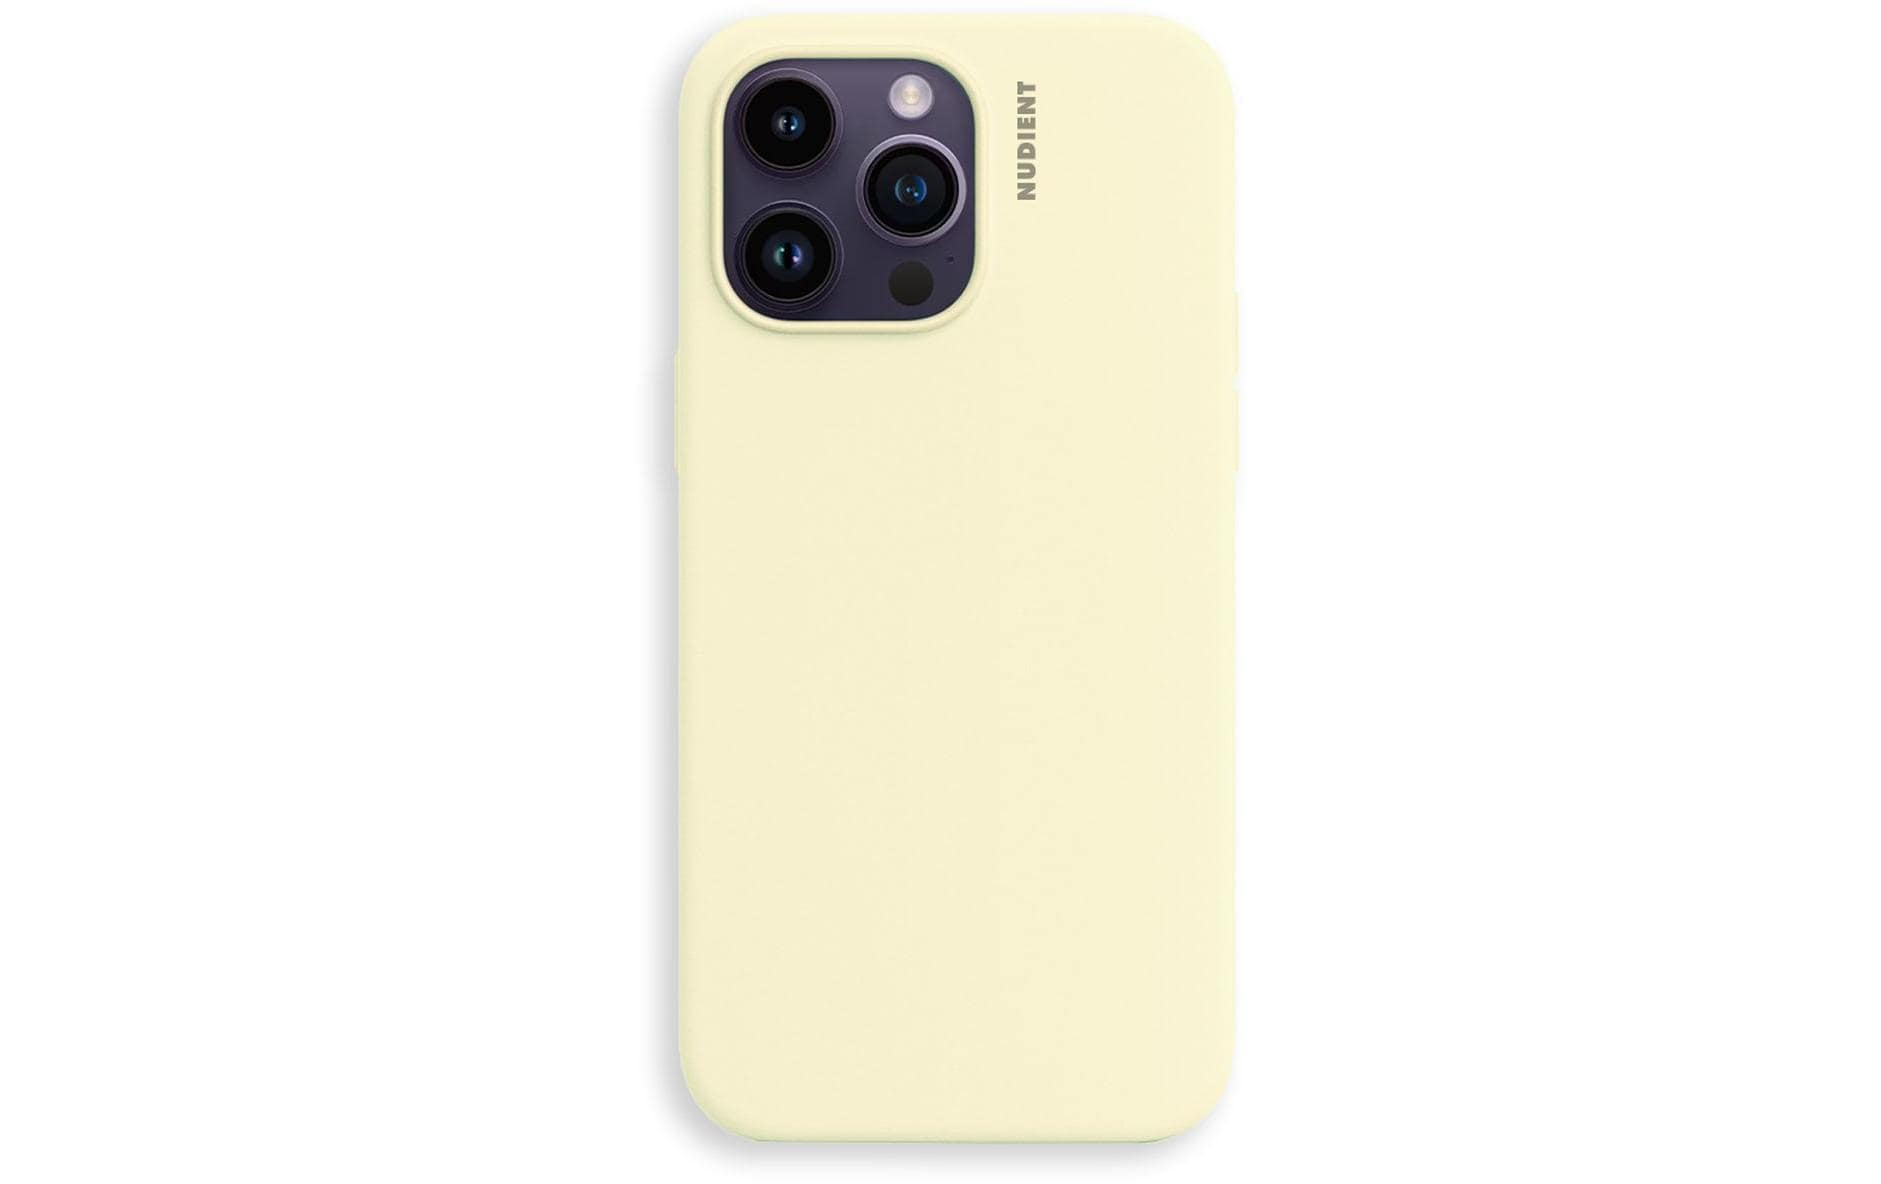 Nudient Back Cover Base Case 14 Pro Max Pale Yellow